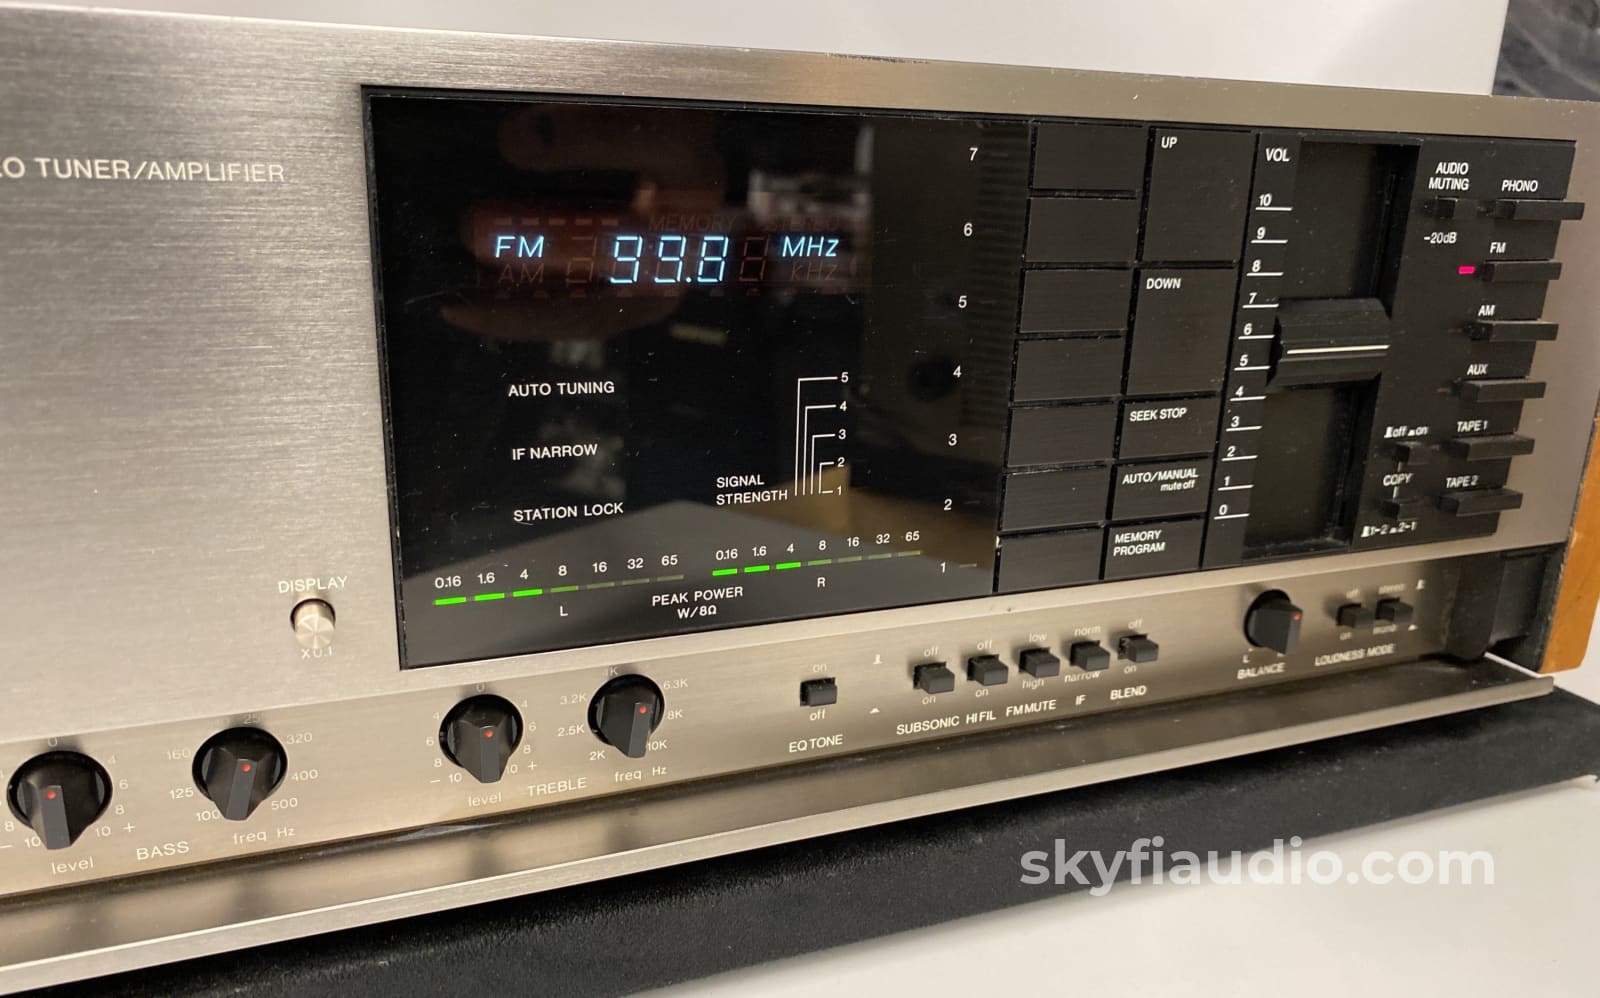 Kyocera R-651 Vintage Am/Fm Stereo Receiver W/Phono Integrated Amplifier